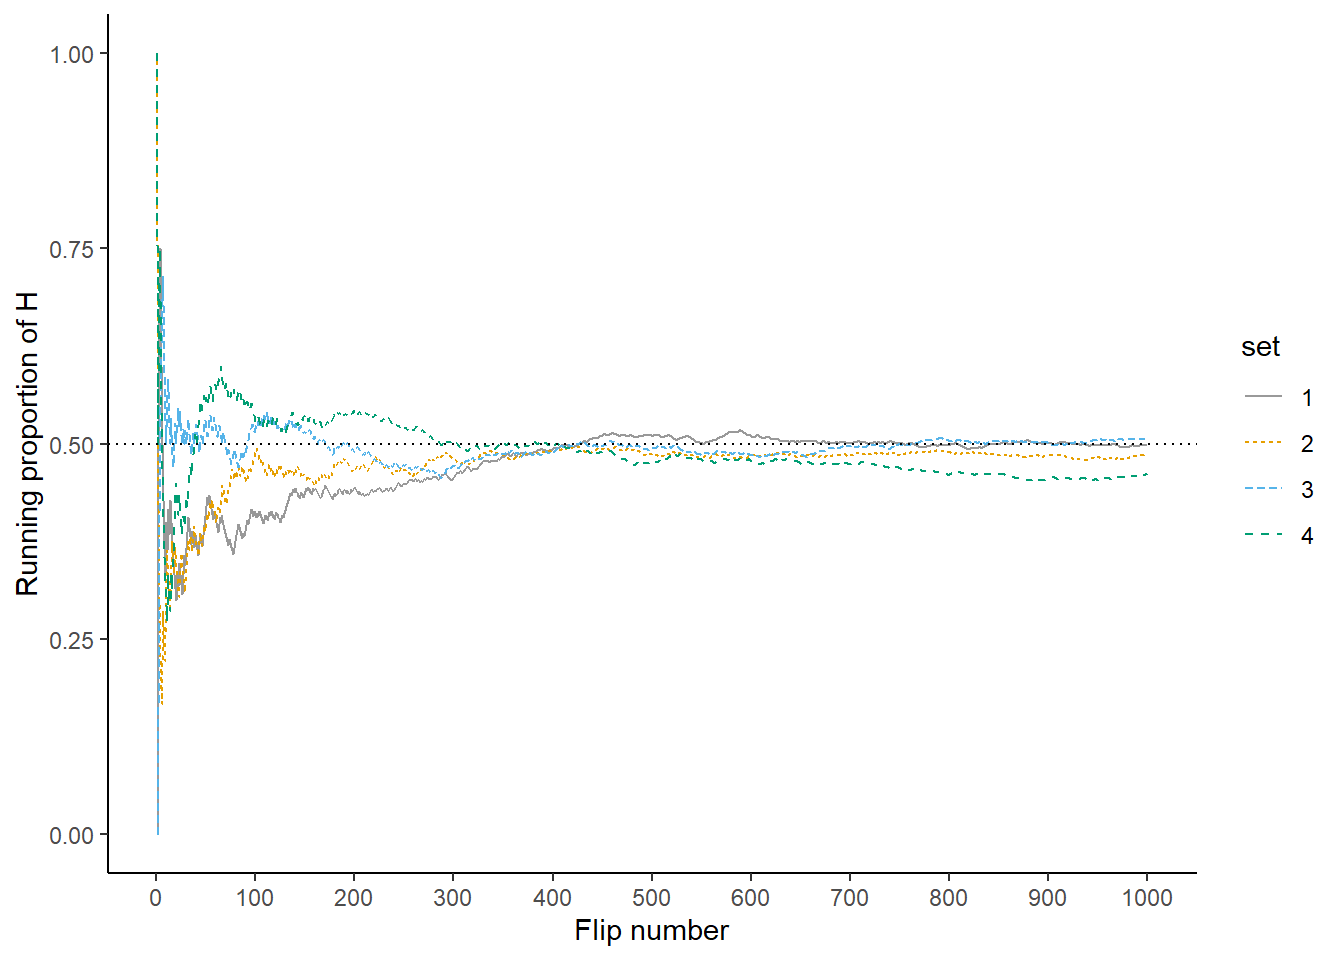 Running proportion of H versus number of flips for four sets of 1000 coin flips.